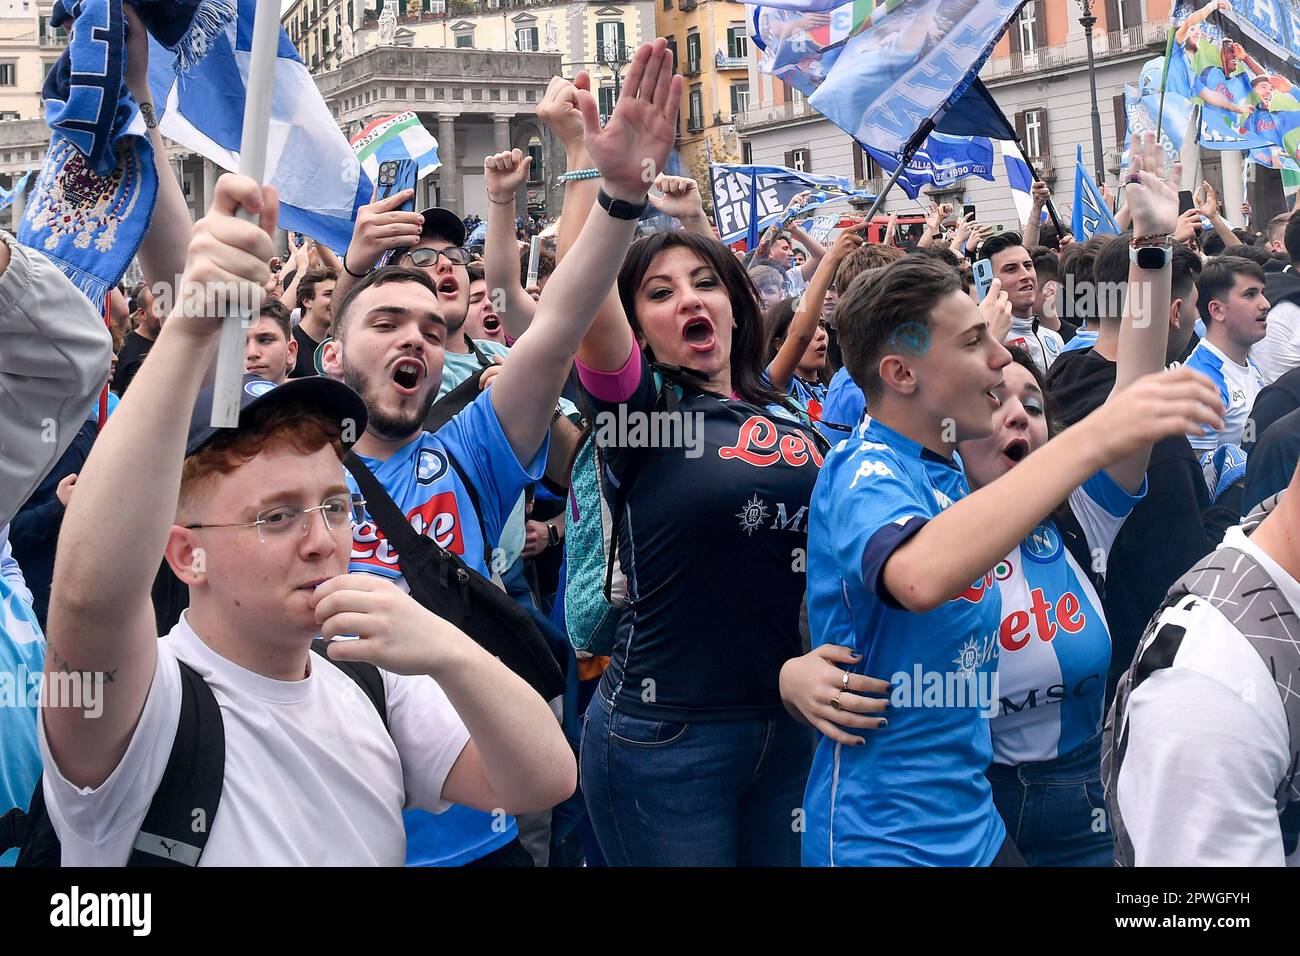 naples-italy-30th-apr-2023-ssc-napoli-fans-celebrate-in-plebiscito-square-in-naples-italy-april-30th-2023-following-the-combination-of-results-from-todays-league-day-napoli-will-have-to-wait-another-day-or-two-of-matches-to-celebrate-its-third-scudetto-credit-insidefoto-di-andrea-stacciolialamy-live-news-2PWGFYH.jpg